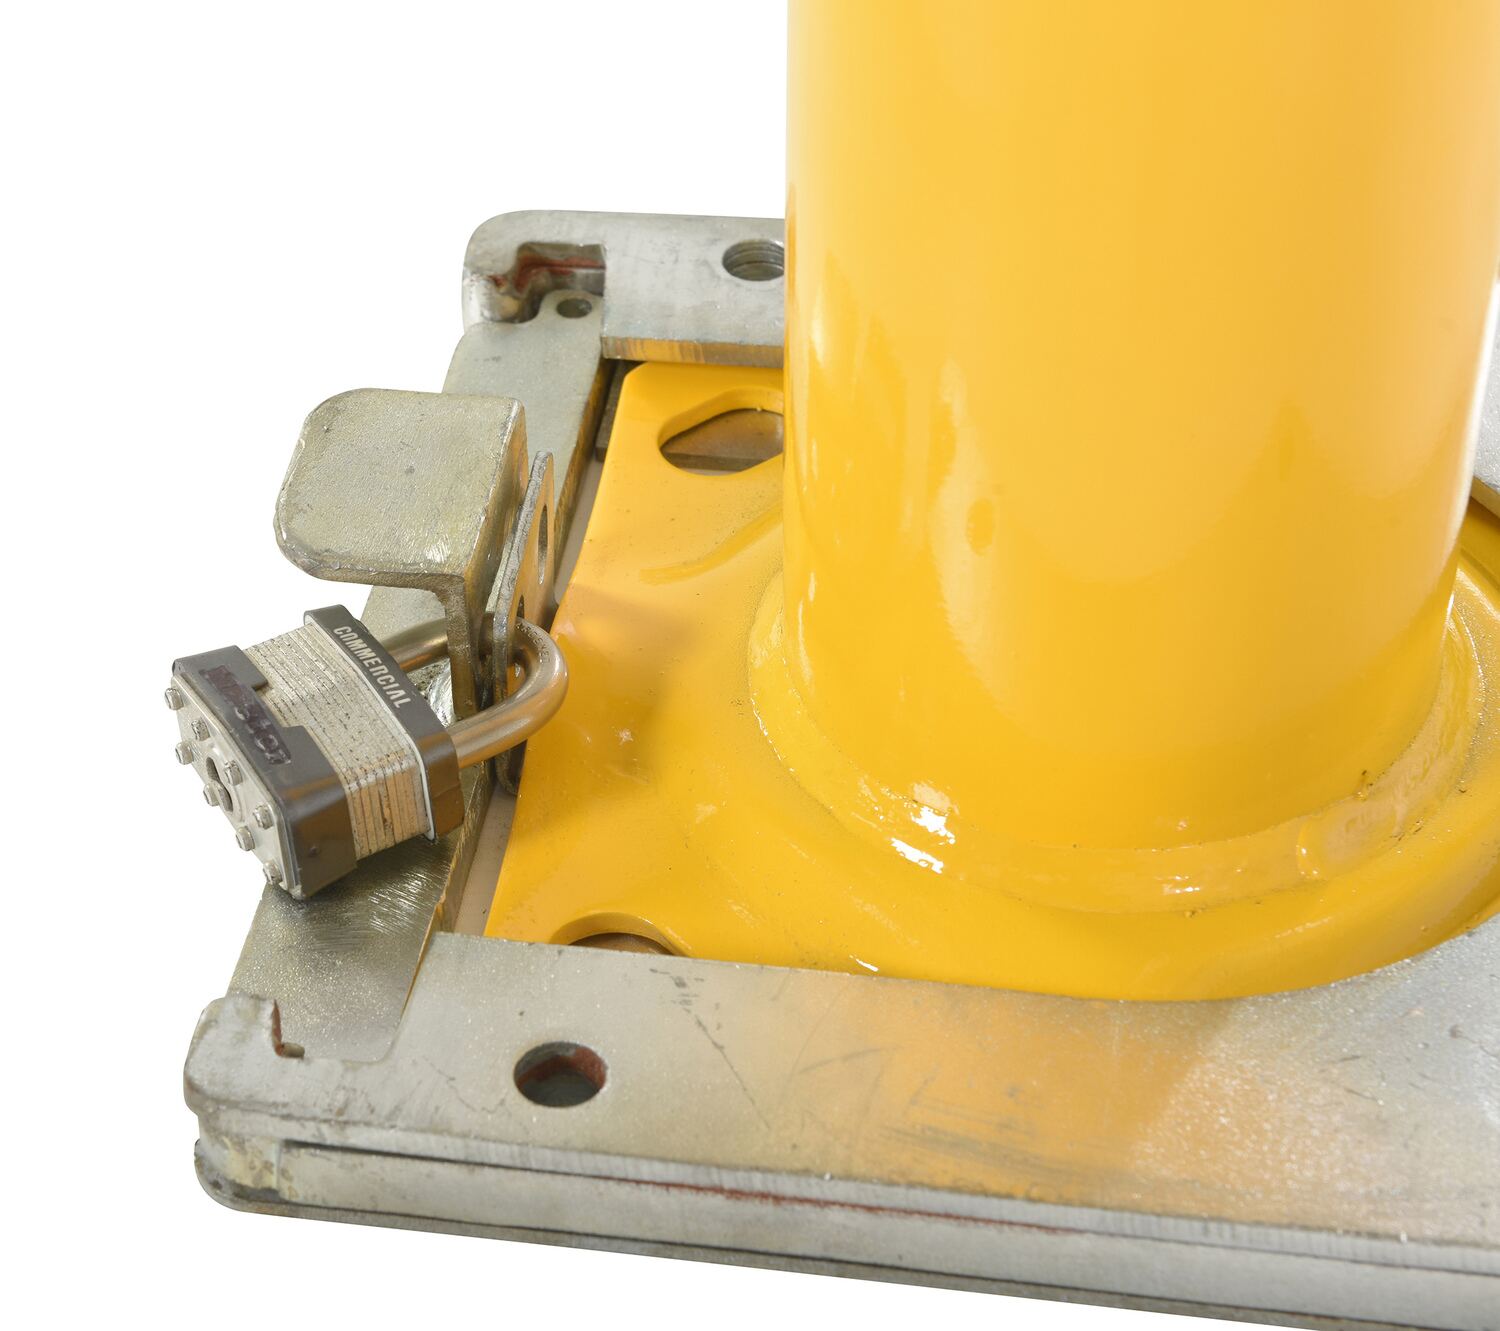 Vestil BOL-RF-42-4.5 Surface Mounted Removable Steel Pipe Safety Bollard 42 Height,Yellow Fоur Расk 4-1/2 OD 